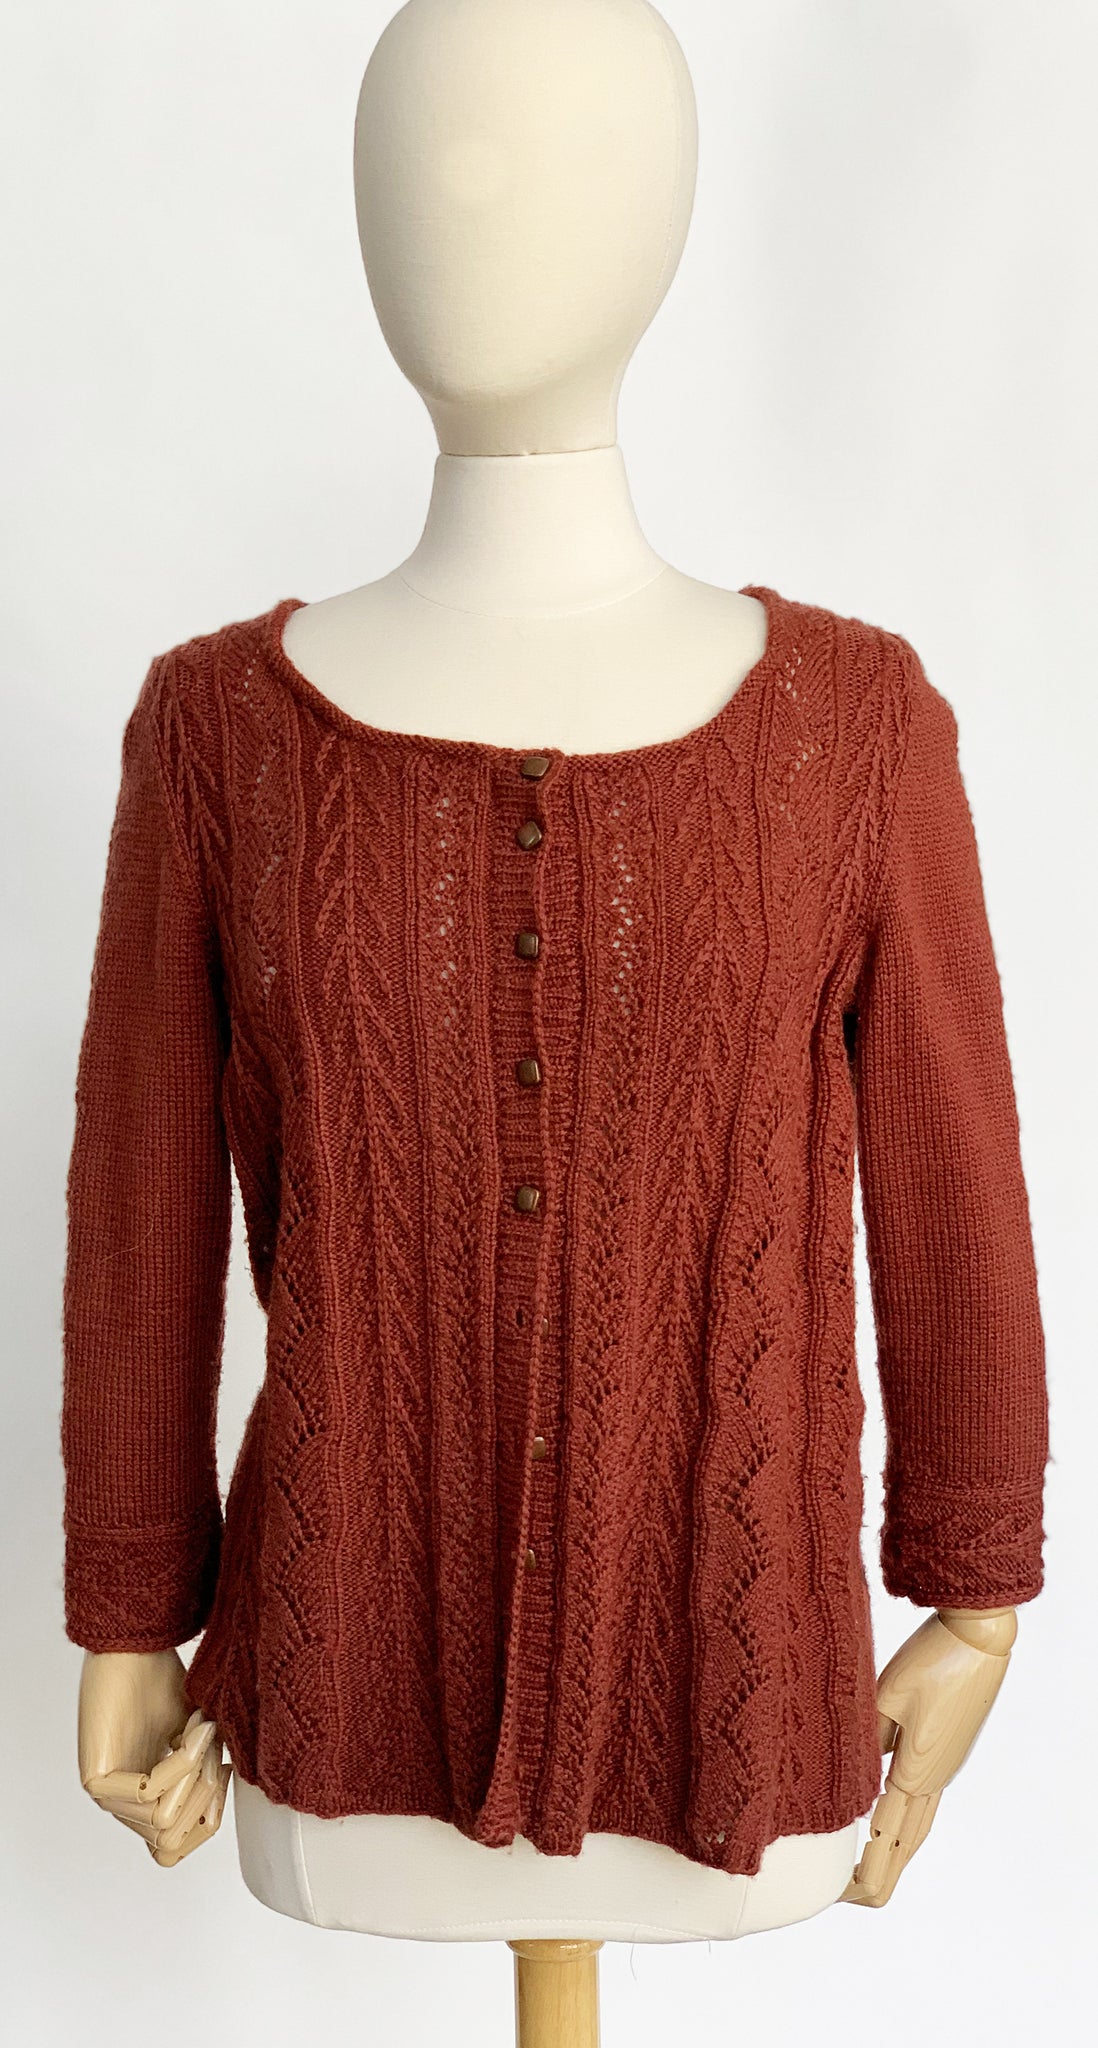 Vines and Arrows Cardigan – Knit One, Crochet Too